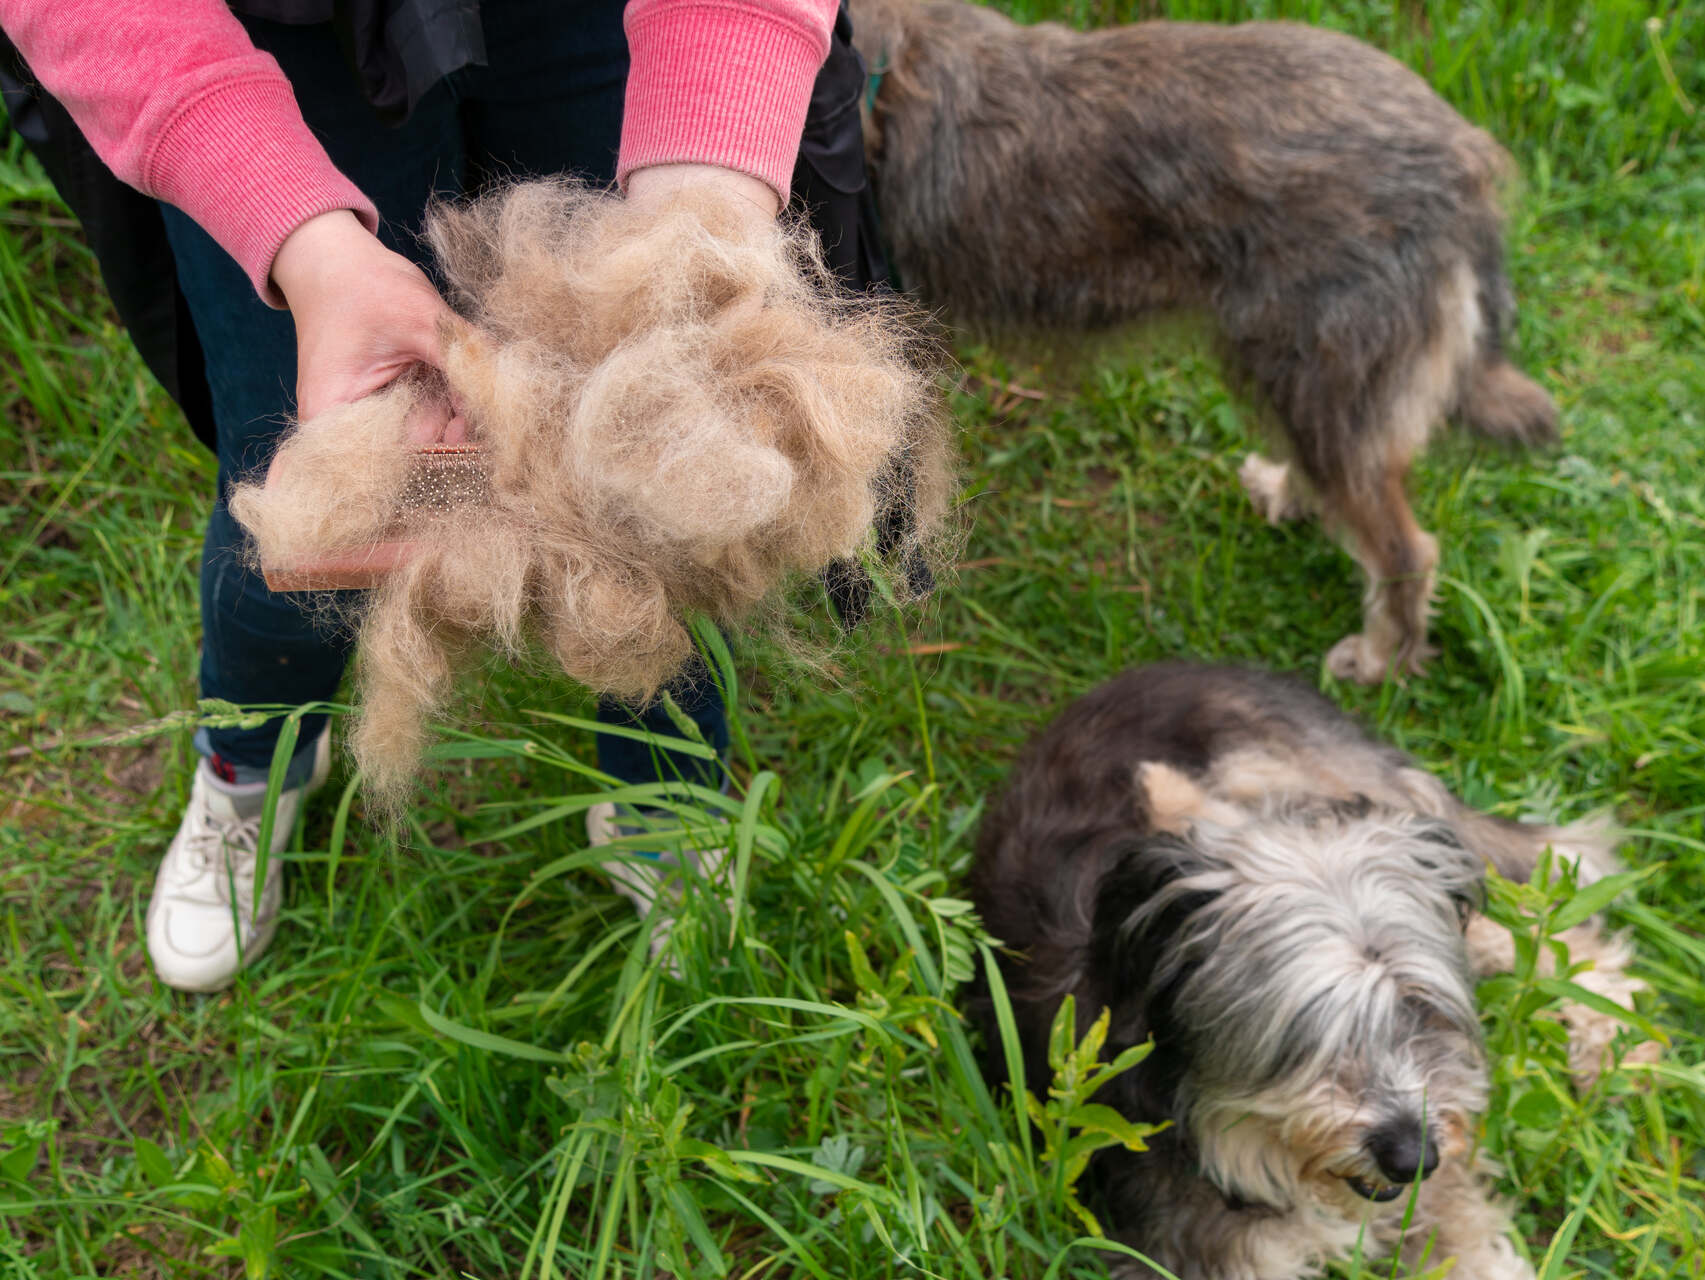 A woman holding a pile of shed fur from a small dog